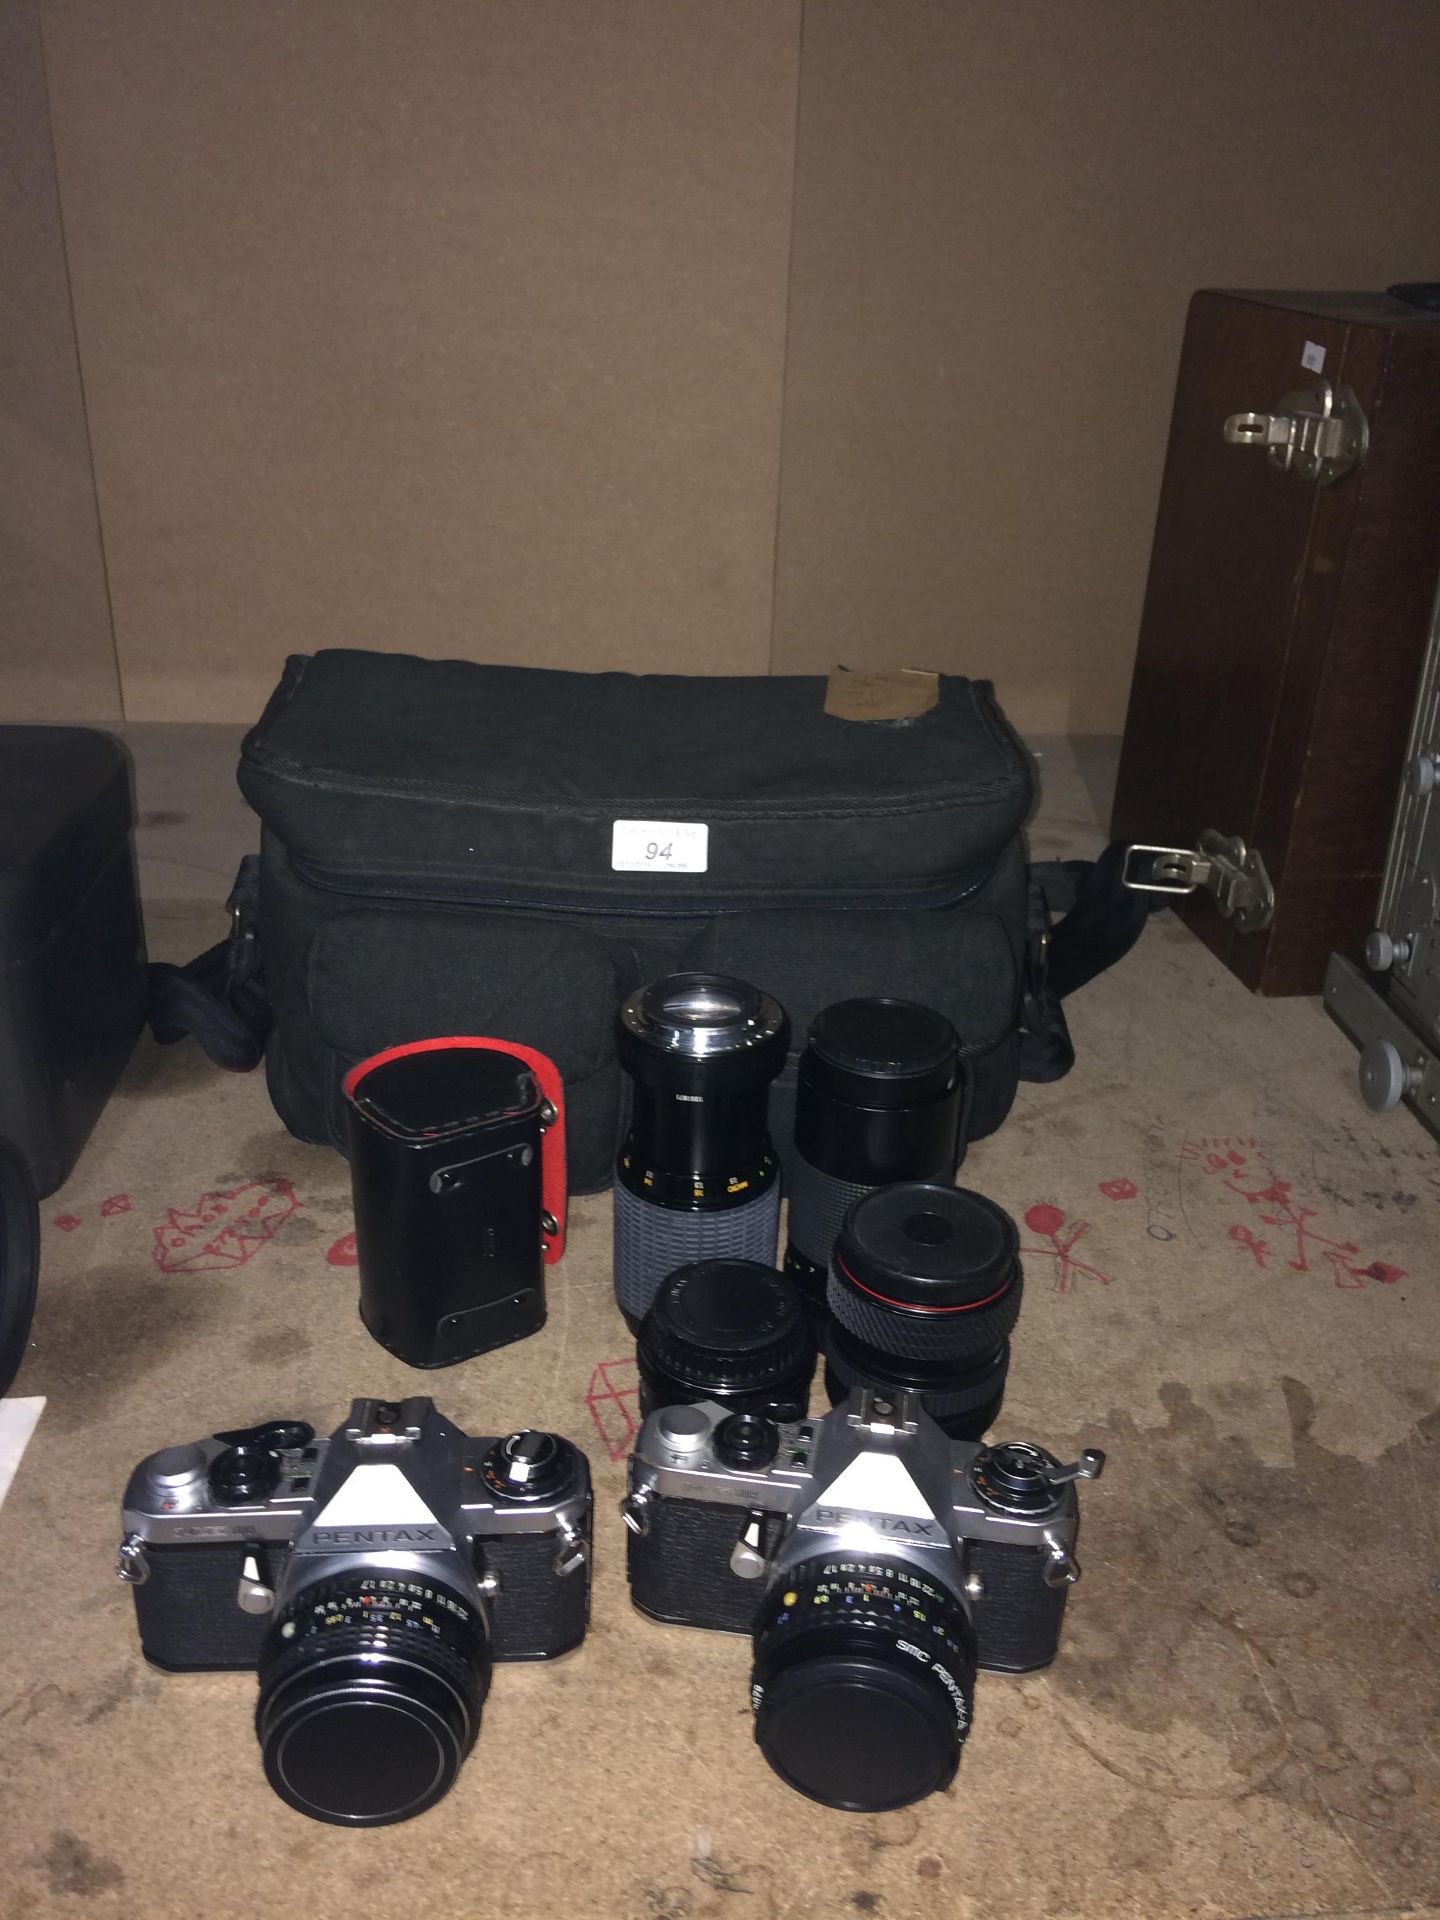 2 x Pentax ME Super cameras together with six lenses and a travel bag